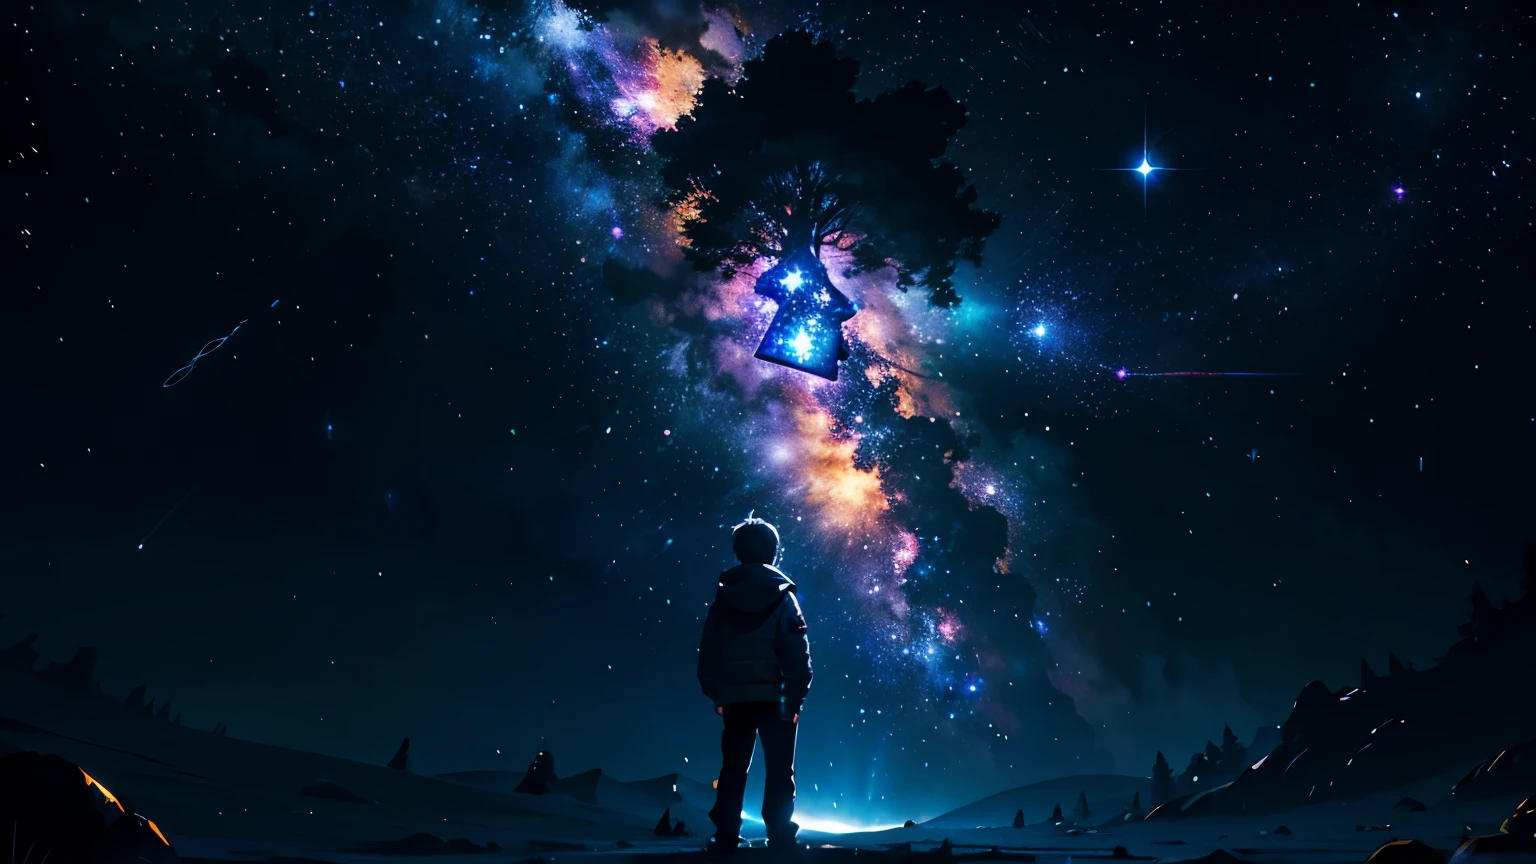 A boy, alone, standing, in outer space, giant star, bright star, dim sky, noble clothing, white clothing, golden clothing, black clothing, Yggdrasil tree, giant tree, smaller stars, (8k super detailed), (masterpiece), ((masterpiece)), ((cinematic quality)), character looking at the screen, Character in space, off-planet, Character flying in space, background stars, Yggdrasil background, Dark sky around, Dark sky background, dark clouds, light clouds, character of light, illuminated character, bright character, emphasis on background elements, emphasis on male character.